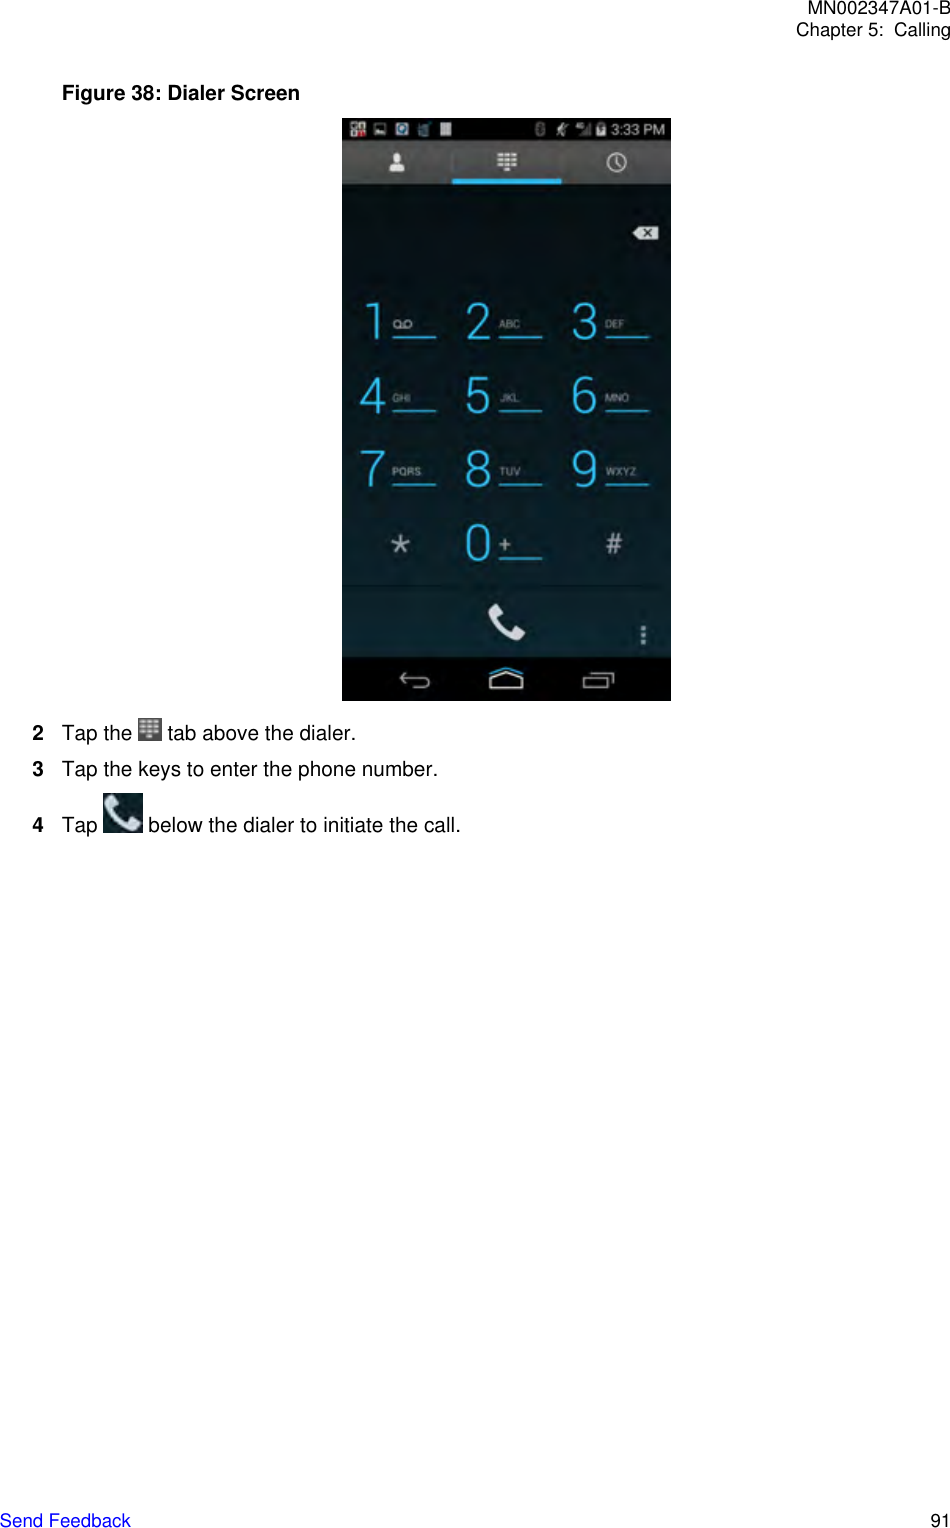 Figure 38: Dialer Screen2Tap the   tab above the dialer.3Tap the keys to enter the phone number.4Tap   below the dialer to initiate the call.MN002347A01-BChapter 5:  CallingSend Feedback   91